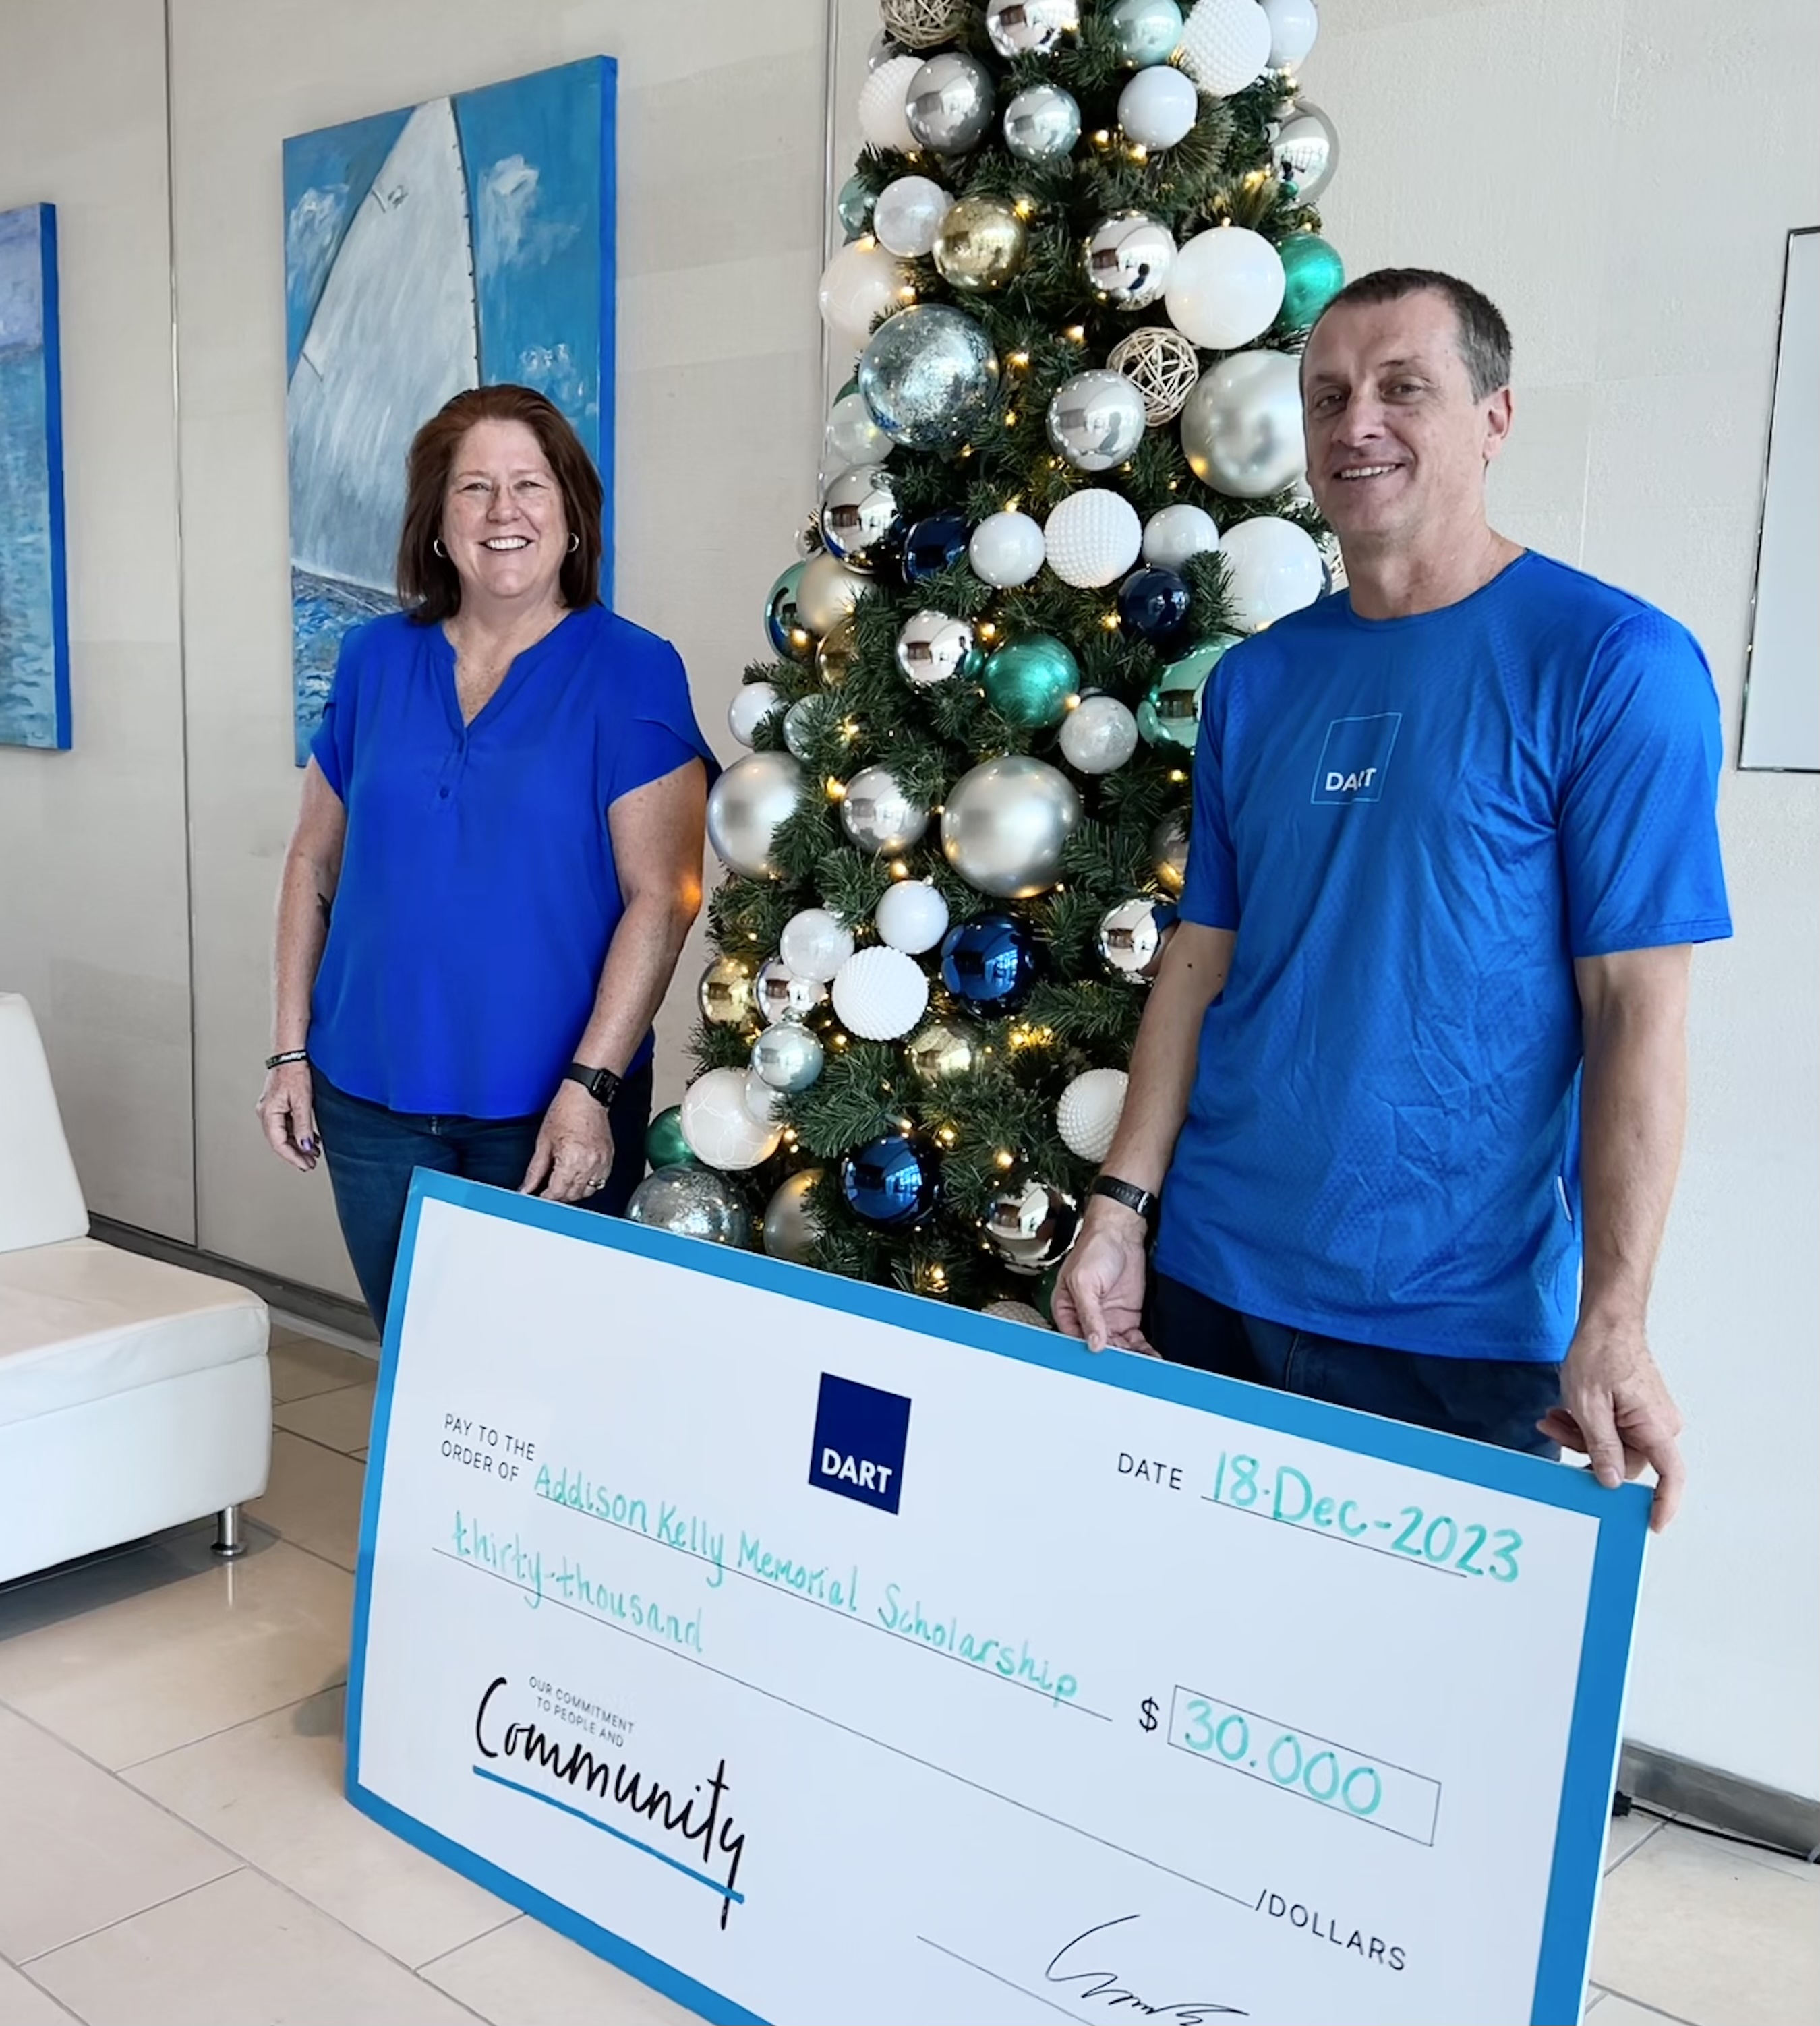 Dart donation helps expand mental health support for Cayman Islands youth